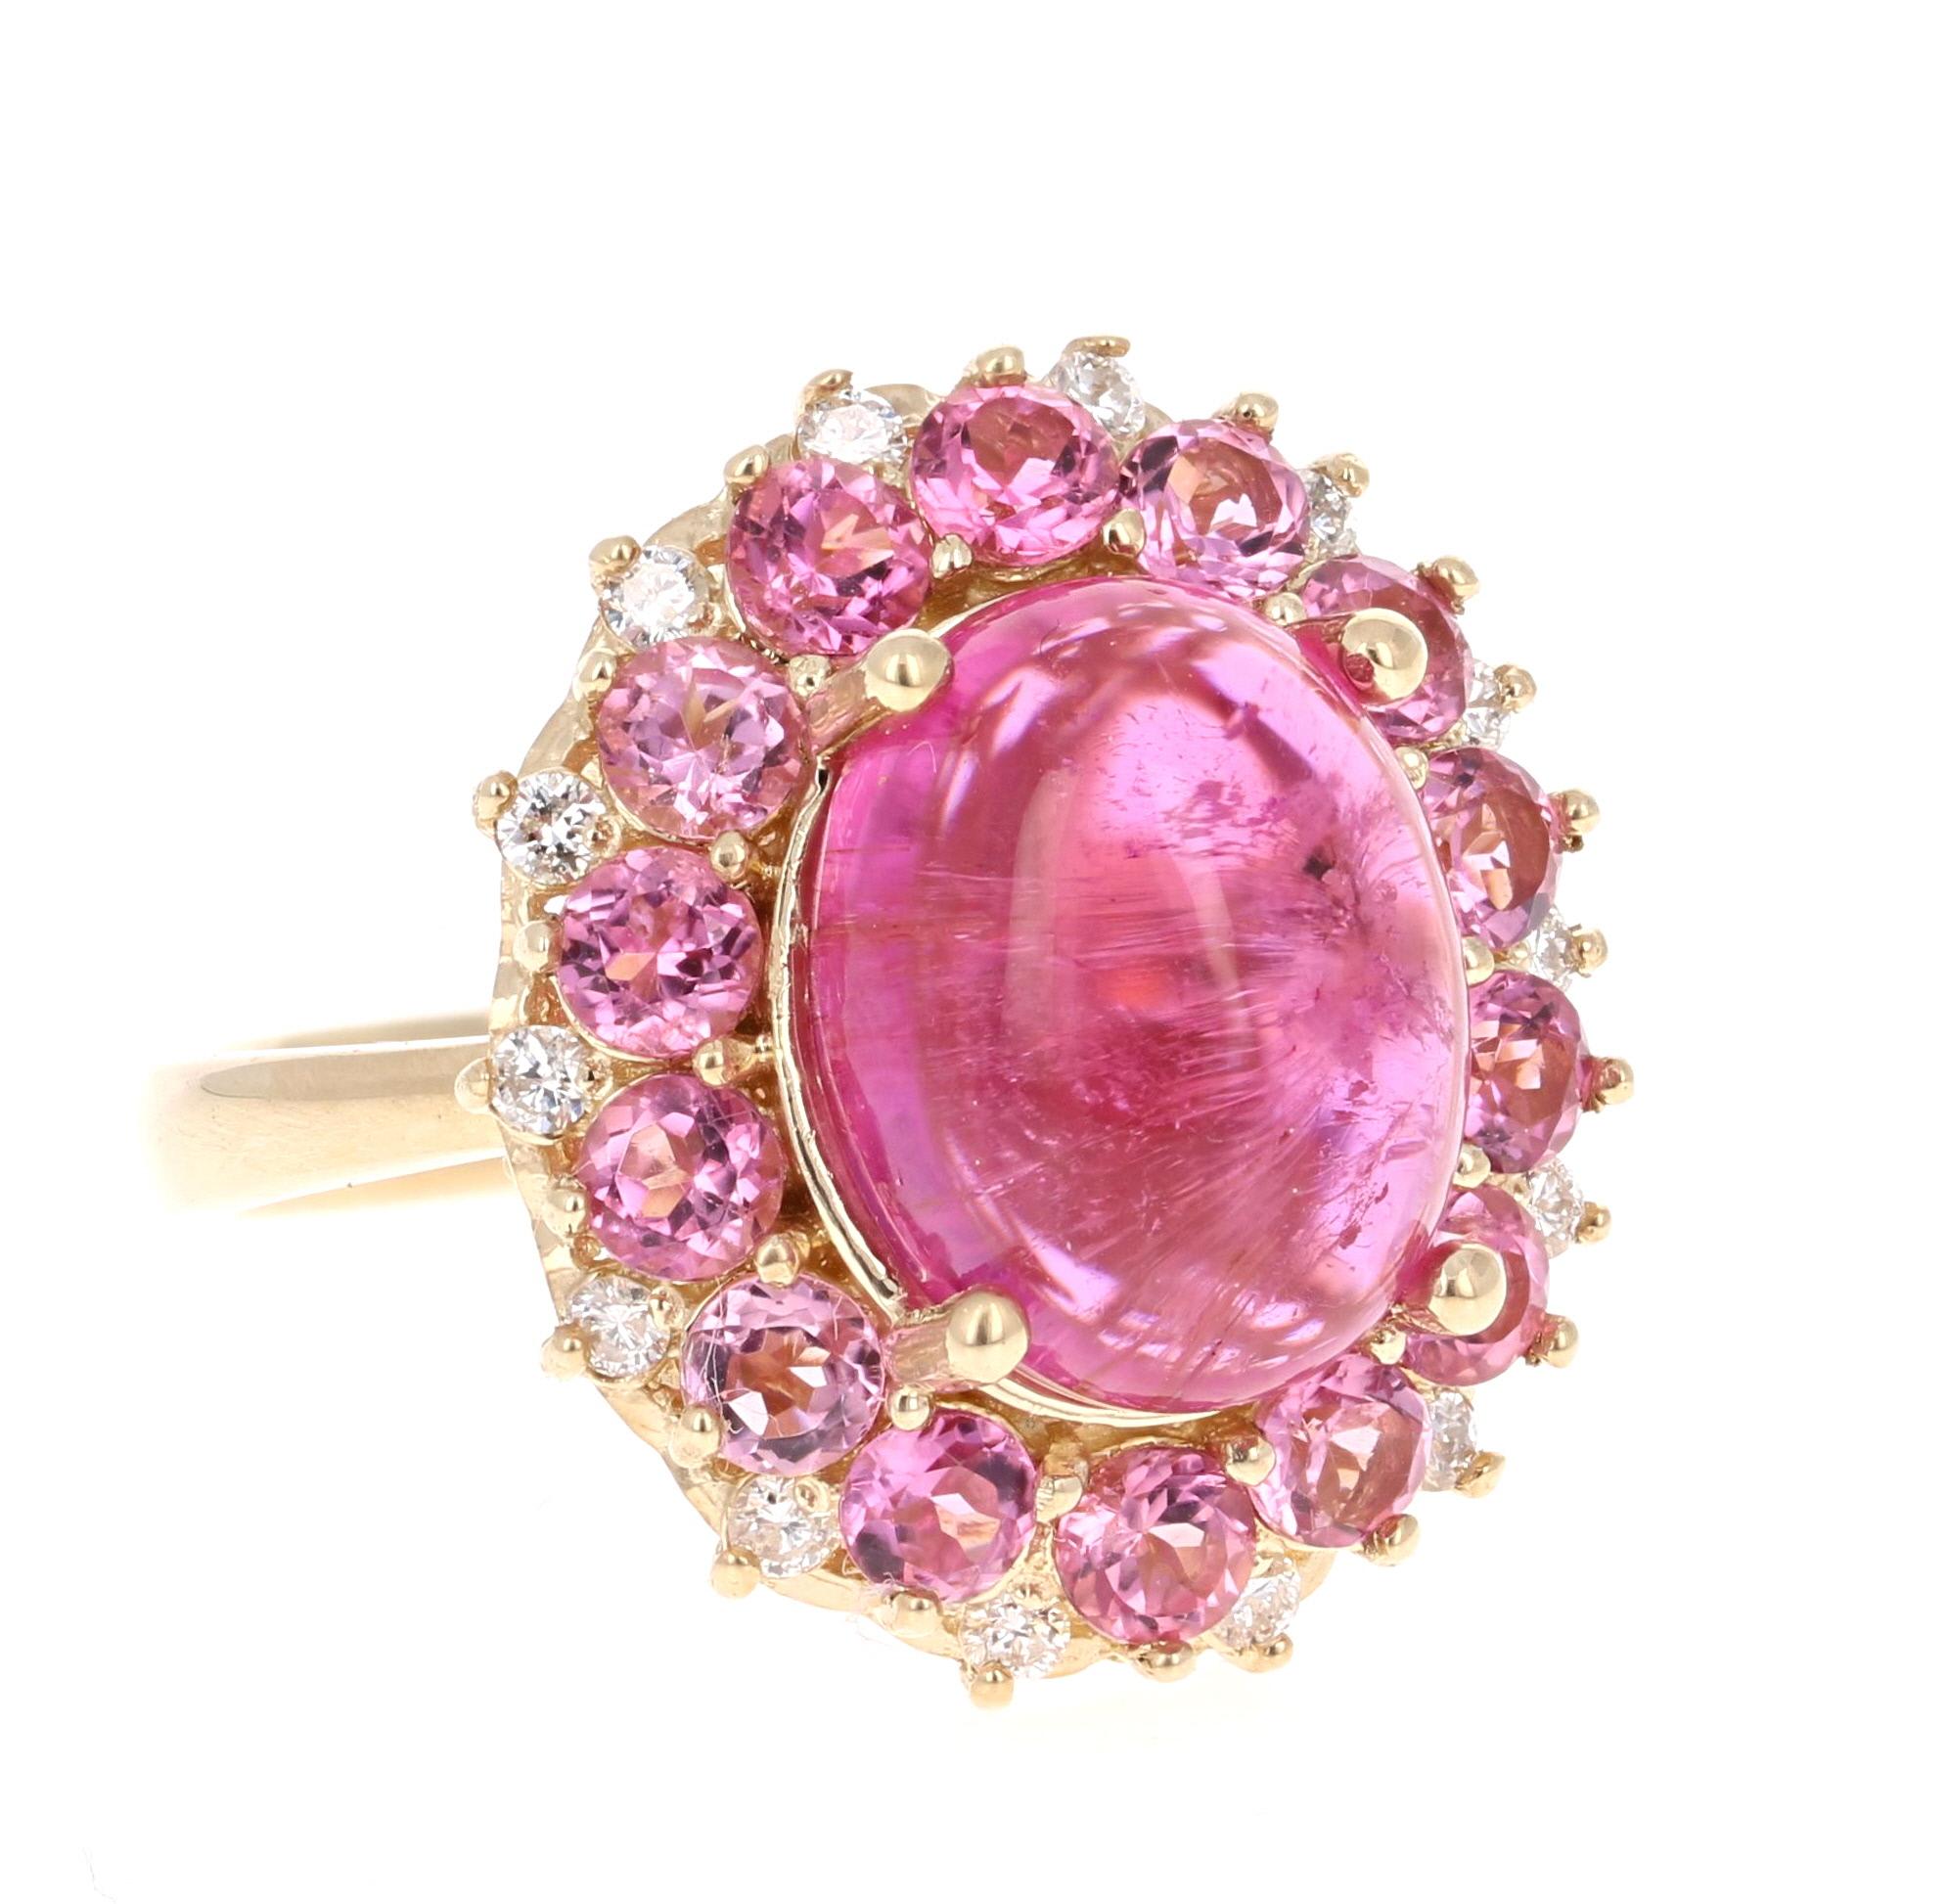 Stunning and uniquely designed 7.82 Carat Pink Tourmaline and Diamond Yellow Gold Cocktail Ring! 

This ring has a 6.09 carat Oval Cut Cabochon Pink Tourmaline that is set in the center of the ring and is surrounded by 14 Round Cut Pink Tourmalines